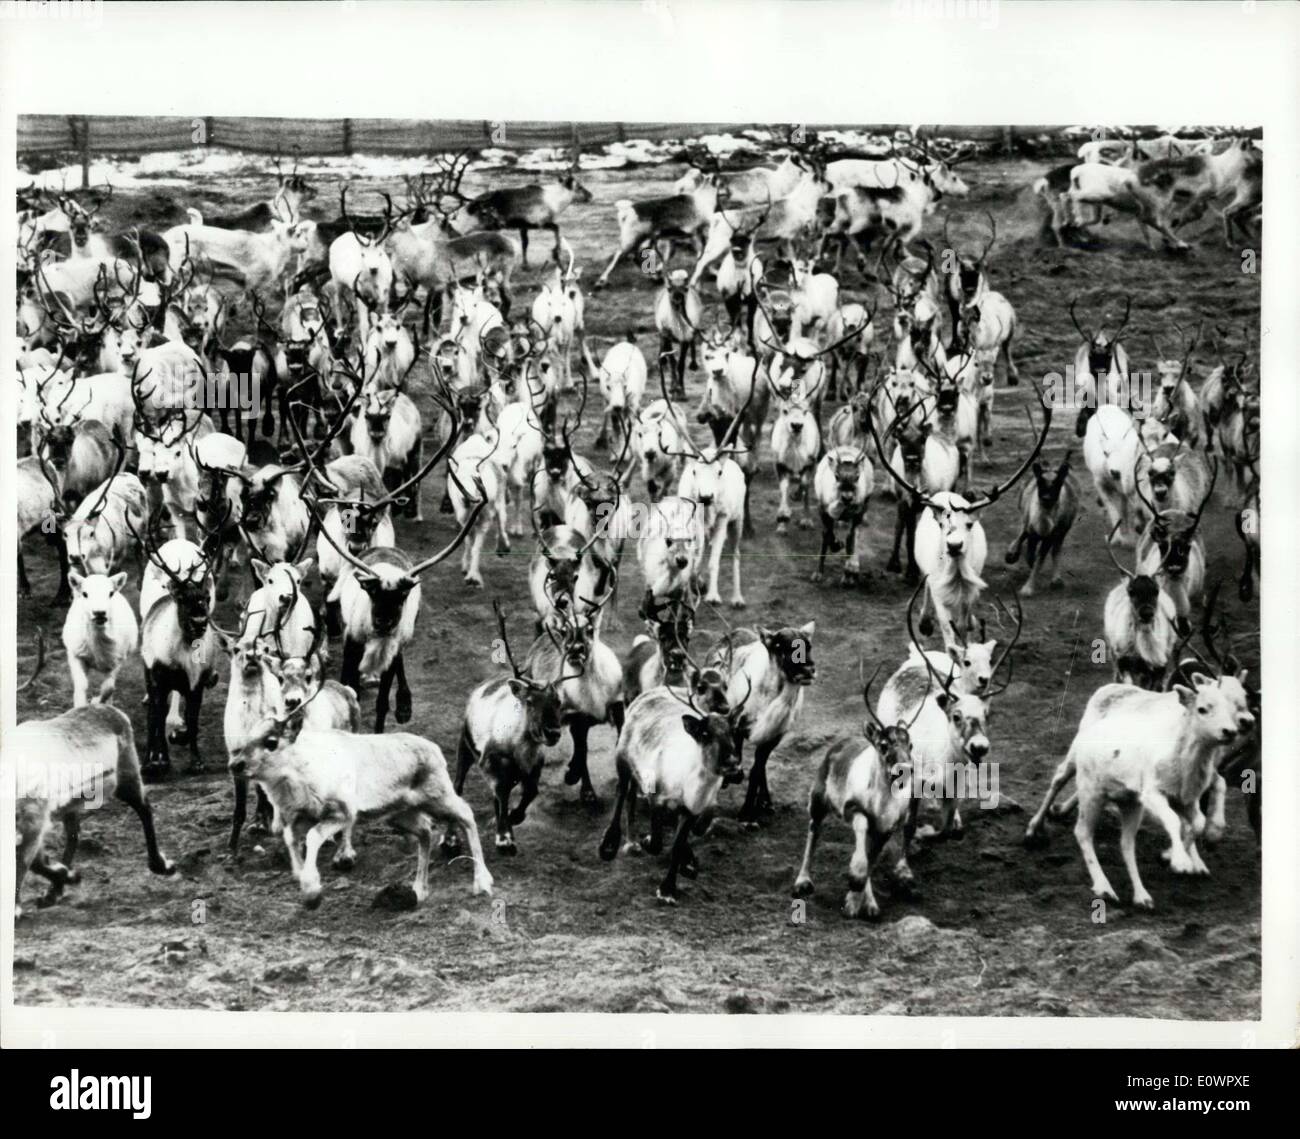 Jan. 16, 1964 - Reindeer Slaughtering In Greenland: For the past twelve years, a new ''industry'' has been pioneered in Greenland, based on the import of Norwegian reindeer, which are being successfully bred so that the herds now number several thousand animals which are being used for their meat. The young herdsmen all come from Lapland, and have to serve an apprenticeship of about four years, following the herds on foot in the summer, and by ski in the winter, stopping overnight in little huts Stock Photo